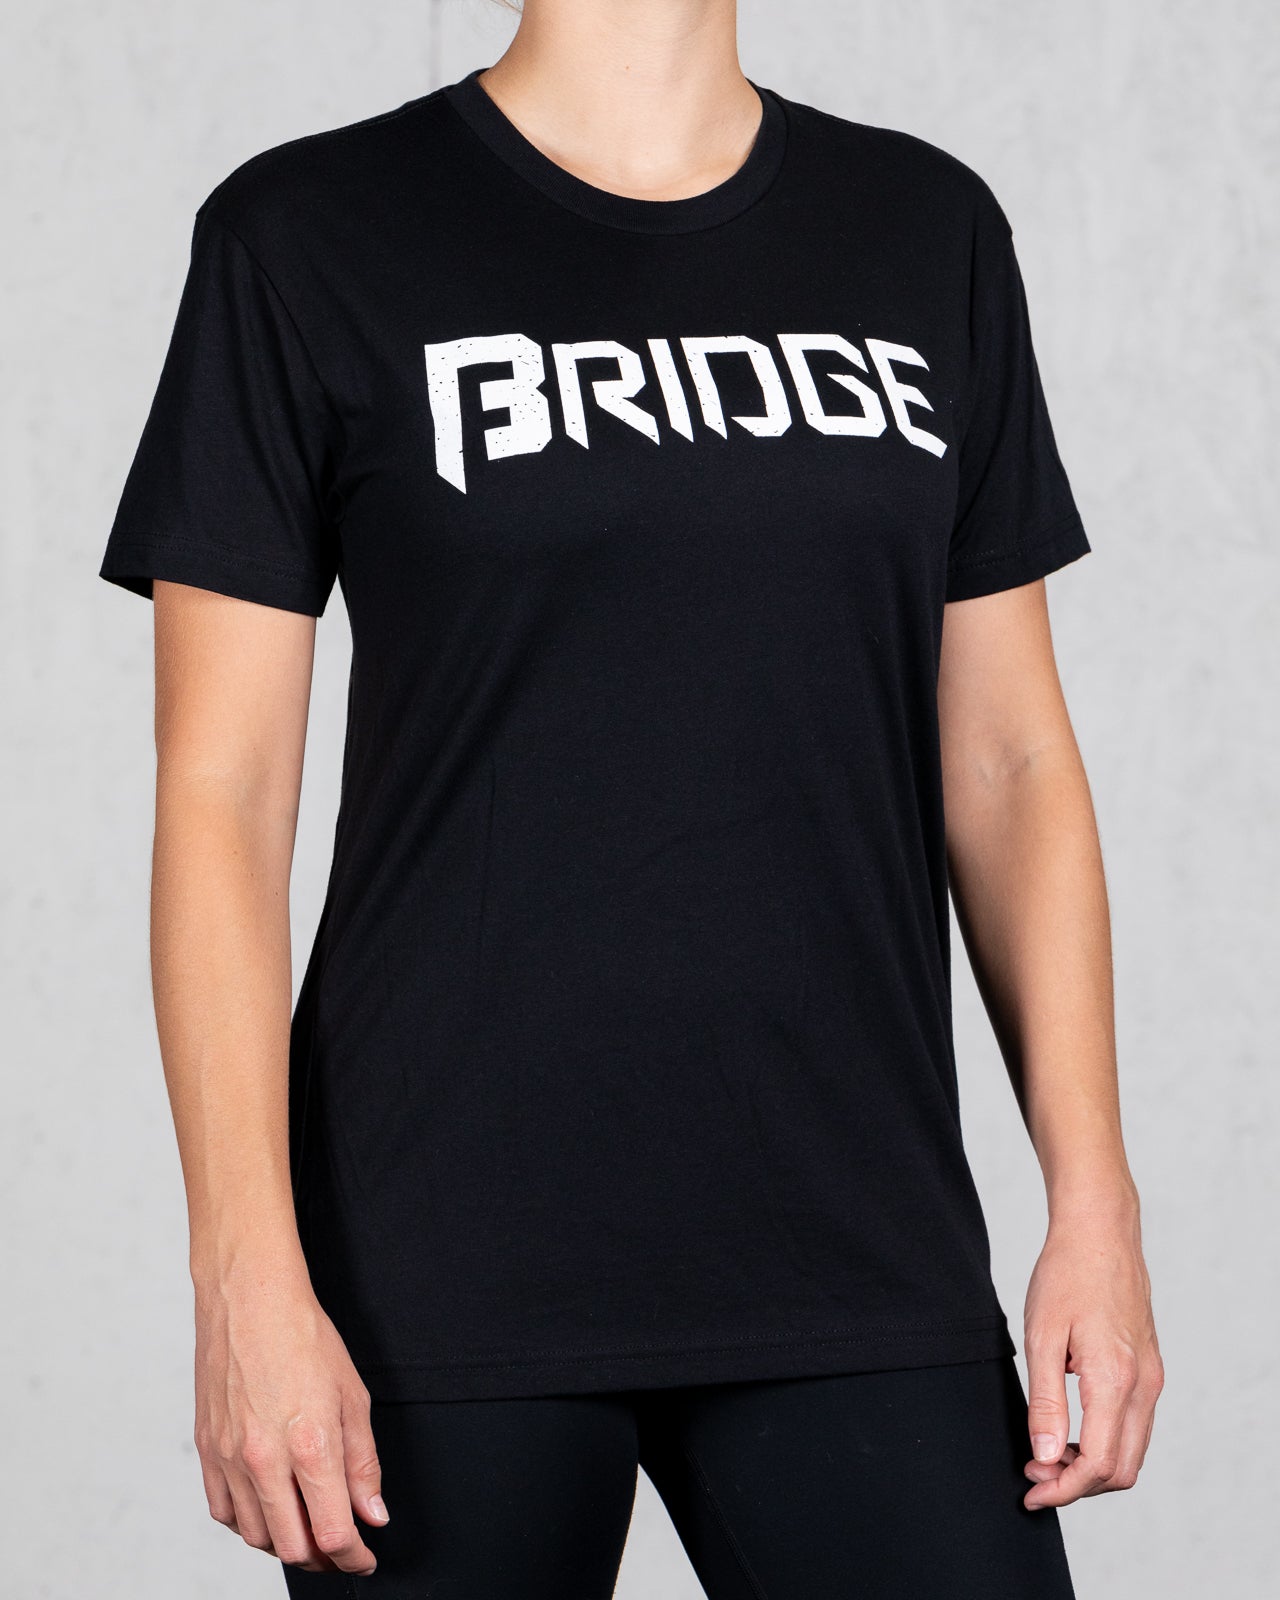 woman wearing black squad tee with bridge on the front